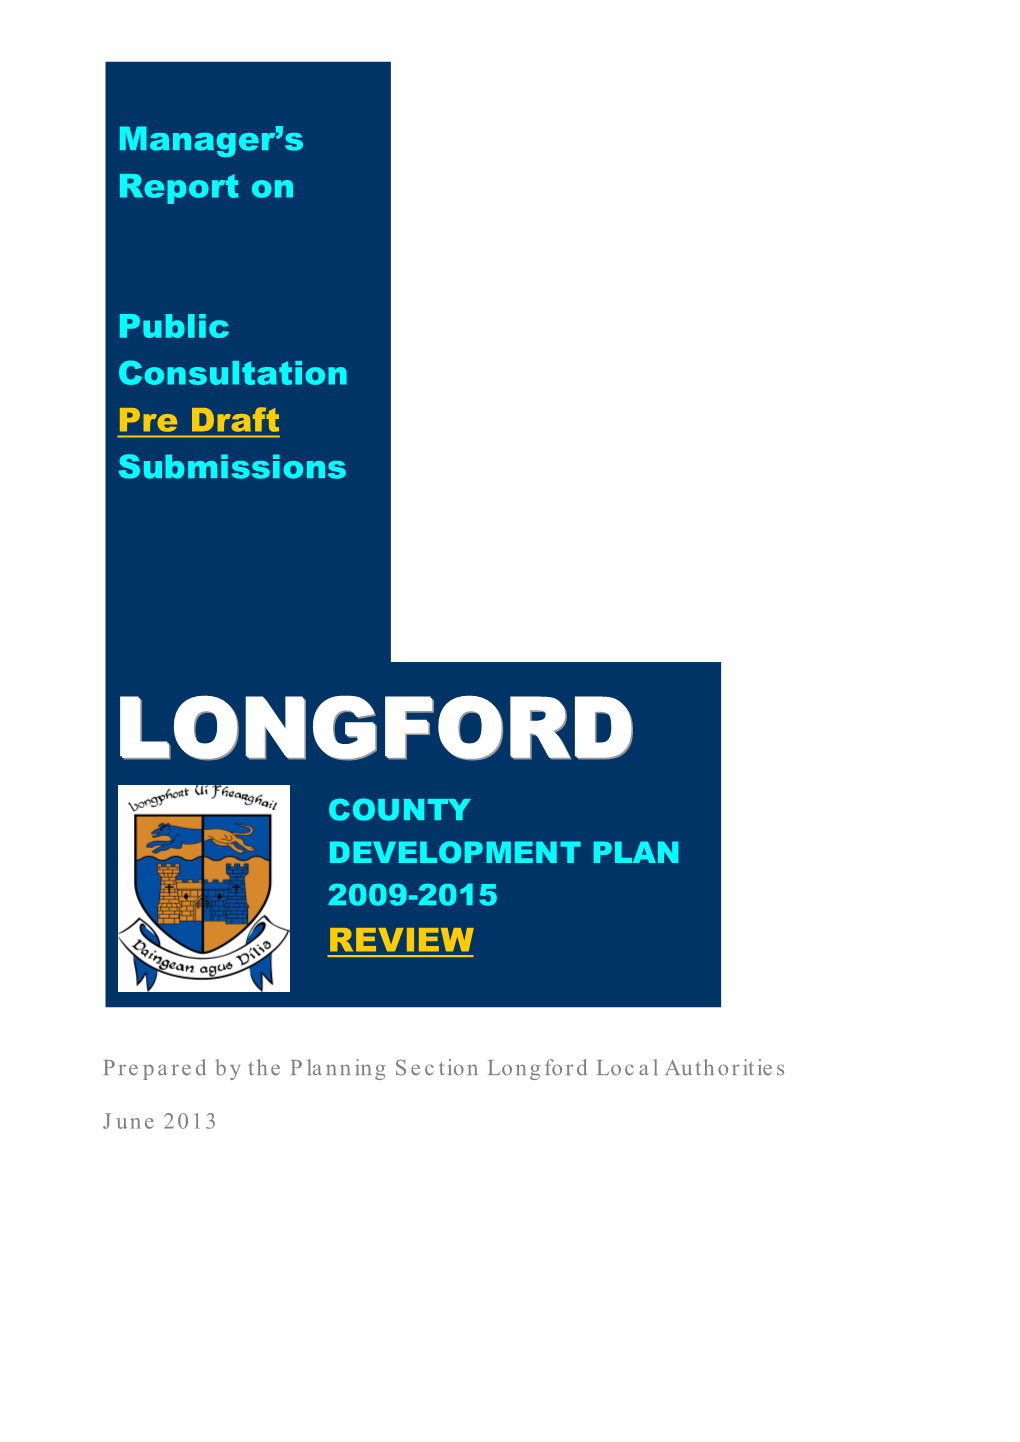 Manager's Report on Public Consultation